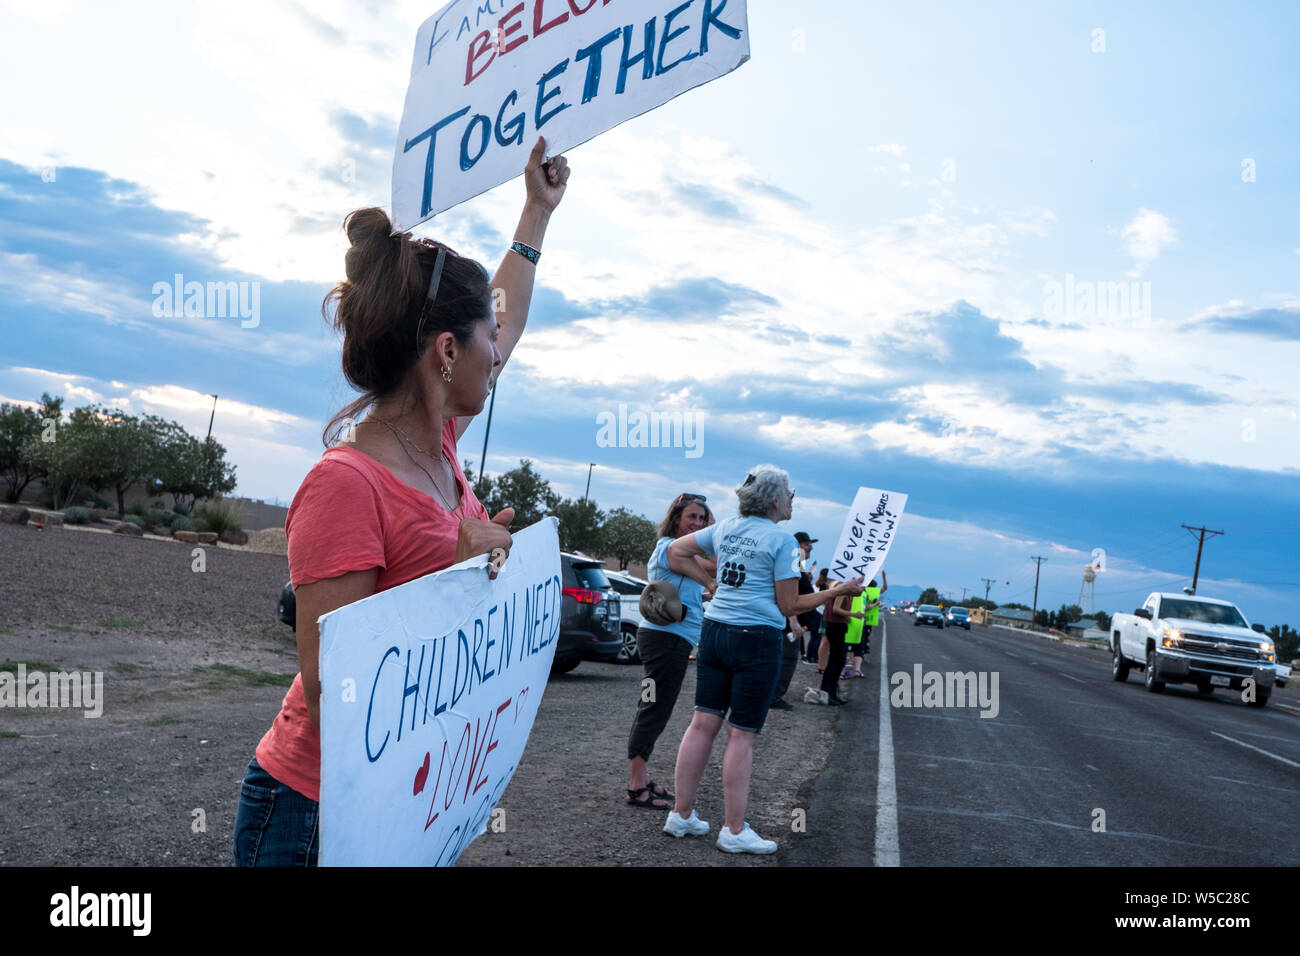 Texas, USA. 27th July, 2019. YVONNE NIVES of El Paso holds signs as she gathers with activists during a protest outside the U.S. Border Patrol station in Clint, Texas. The Border Patrol station has received criticism for previous reports of inadequate and poor conditions for migrants being held at the facility. Credit: ZUMA Press, Inc./Alamy Live News Stock Photo